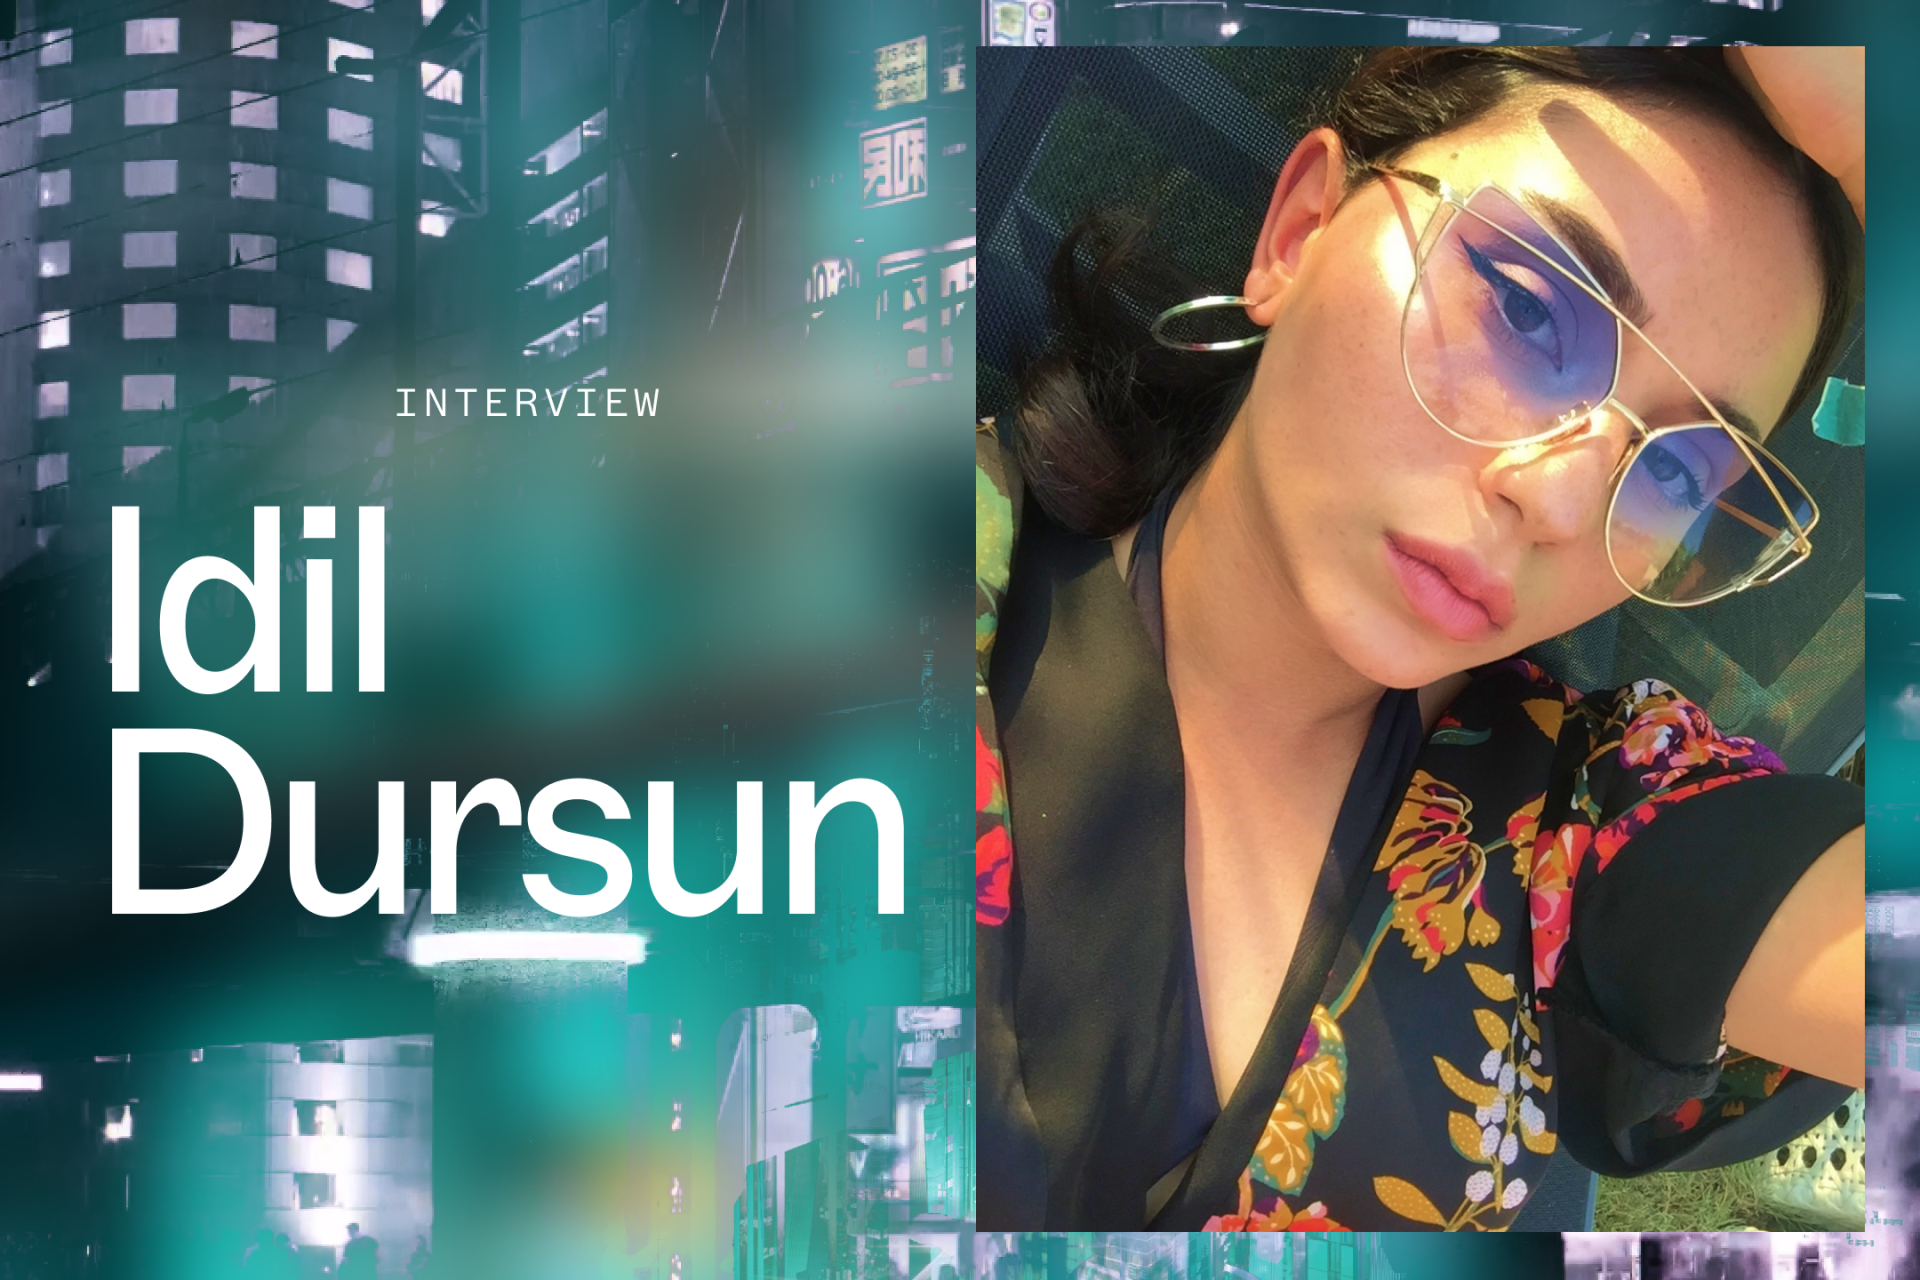 Idil Dursun is constructing new worlds.